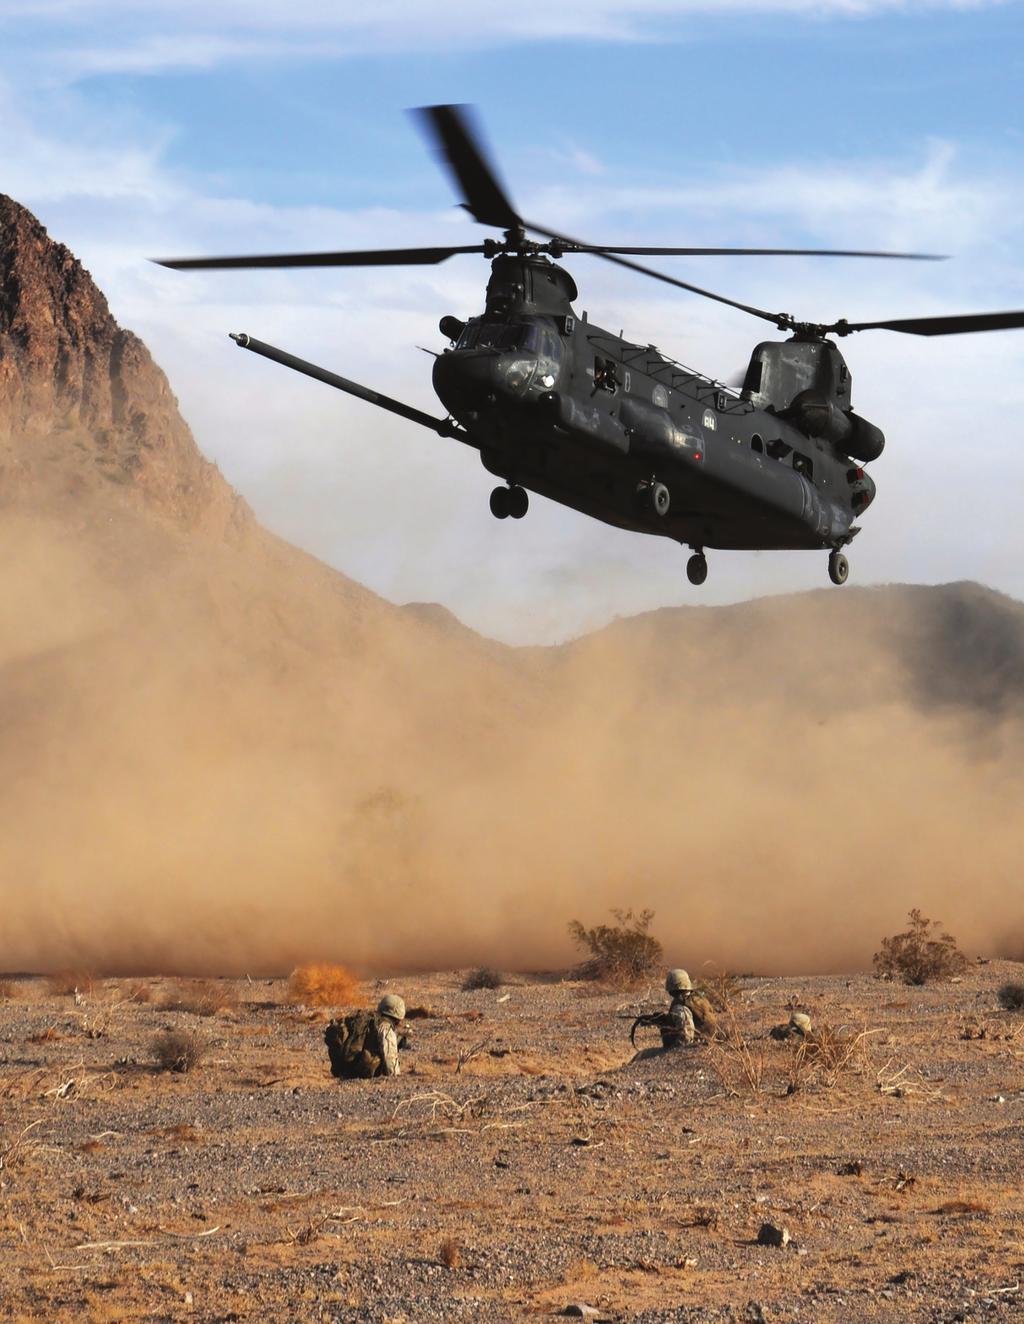 3M Automotive and Aerospace Solutions Division Spec d to protect. Every military mission is a critical mission. It takes training, precision and confidence.